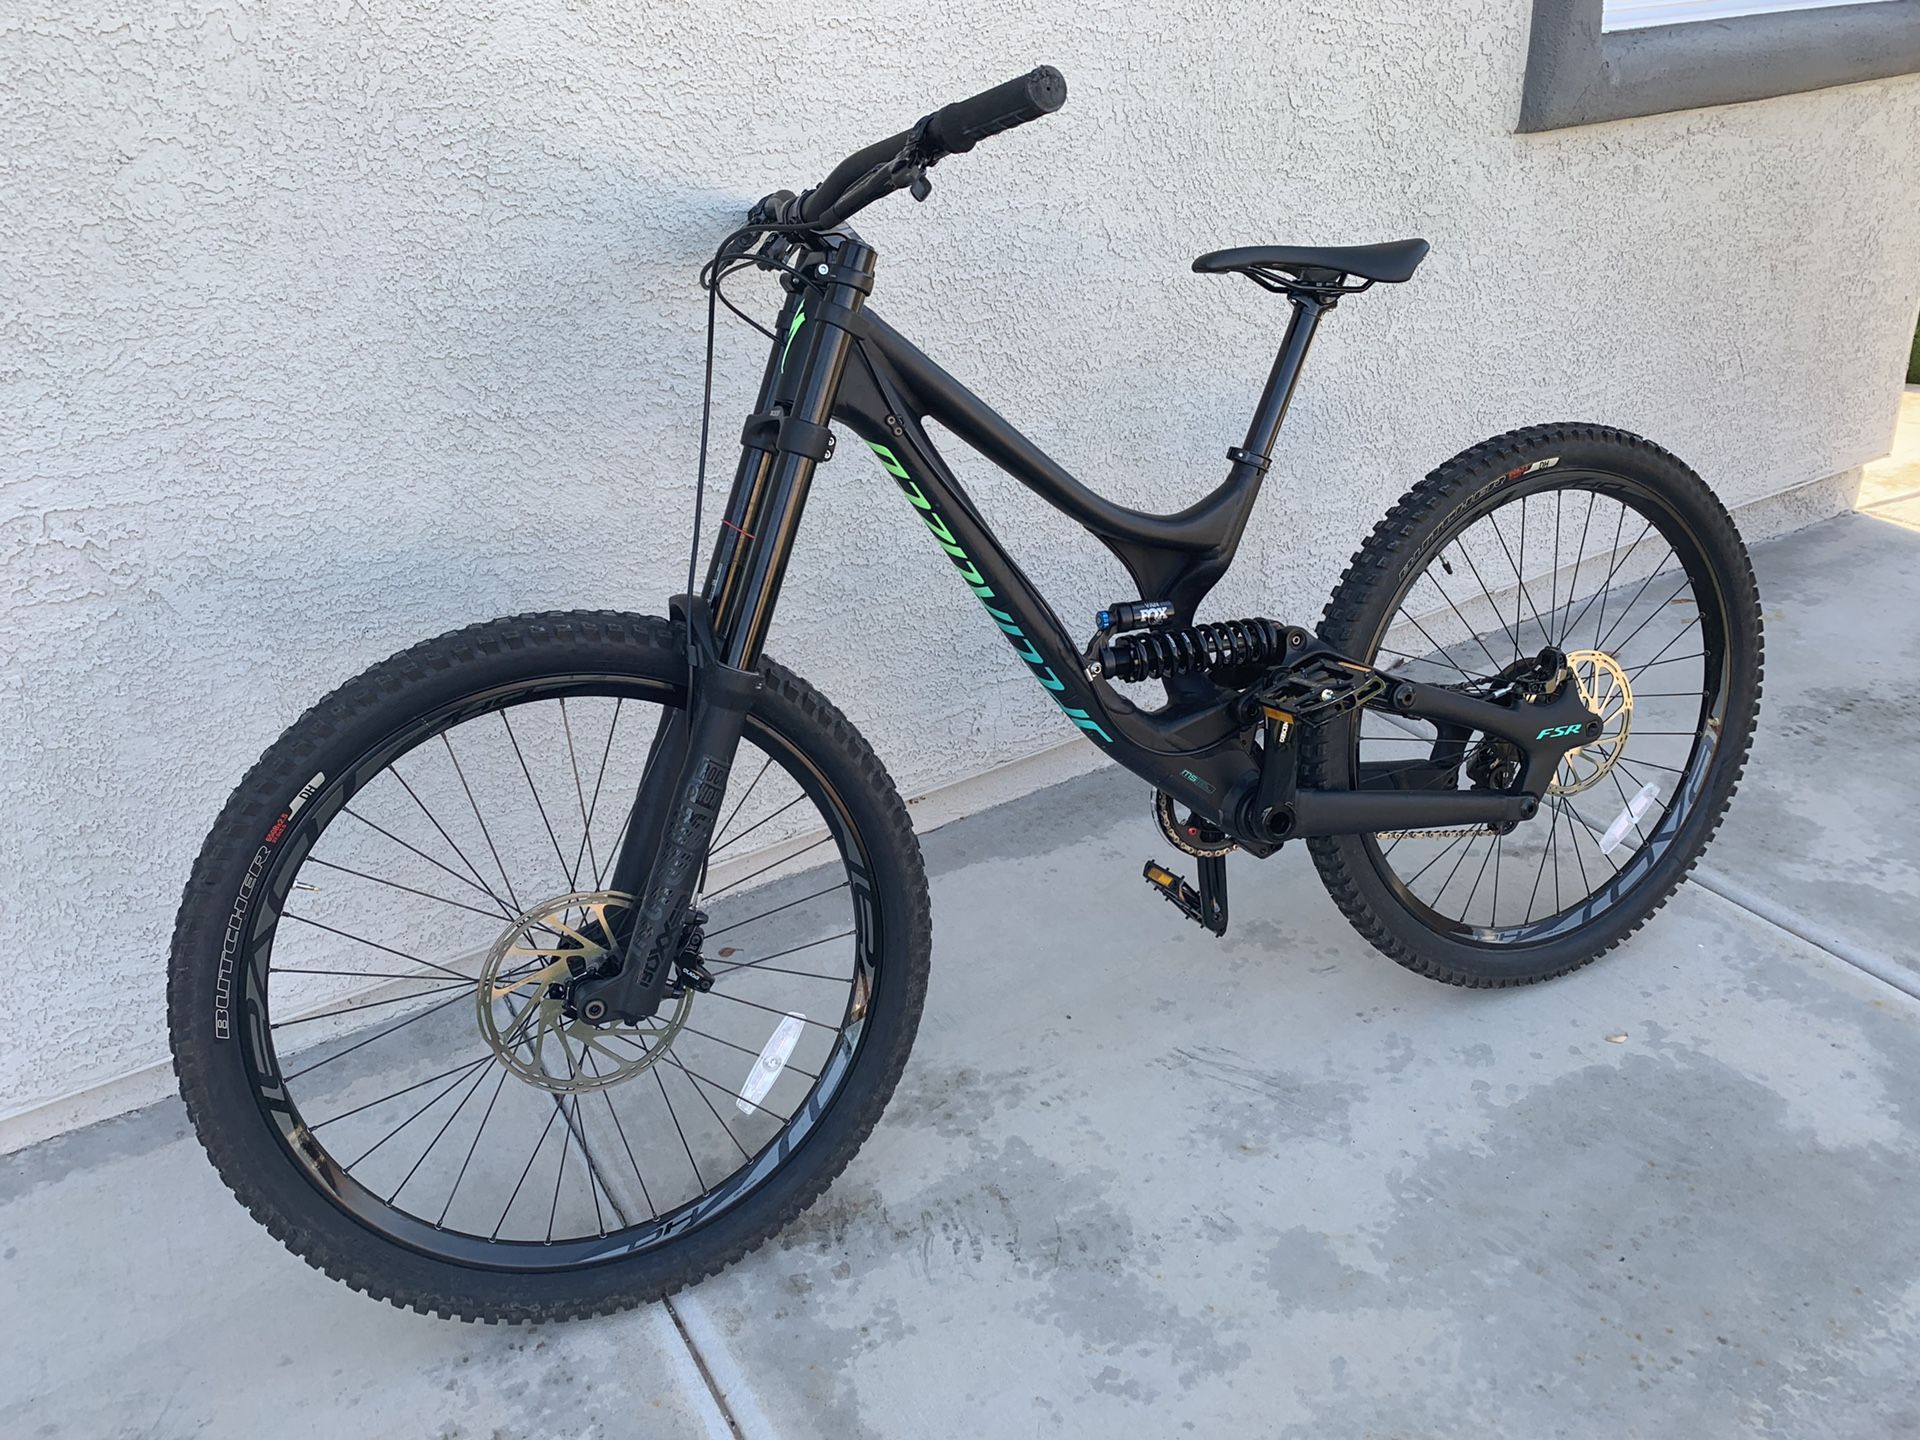 2018 Demo 8 Downhill Specialized mountain bike. WILL TRADE FOR A NICE QUAD